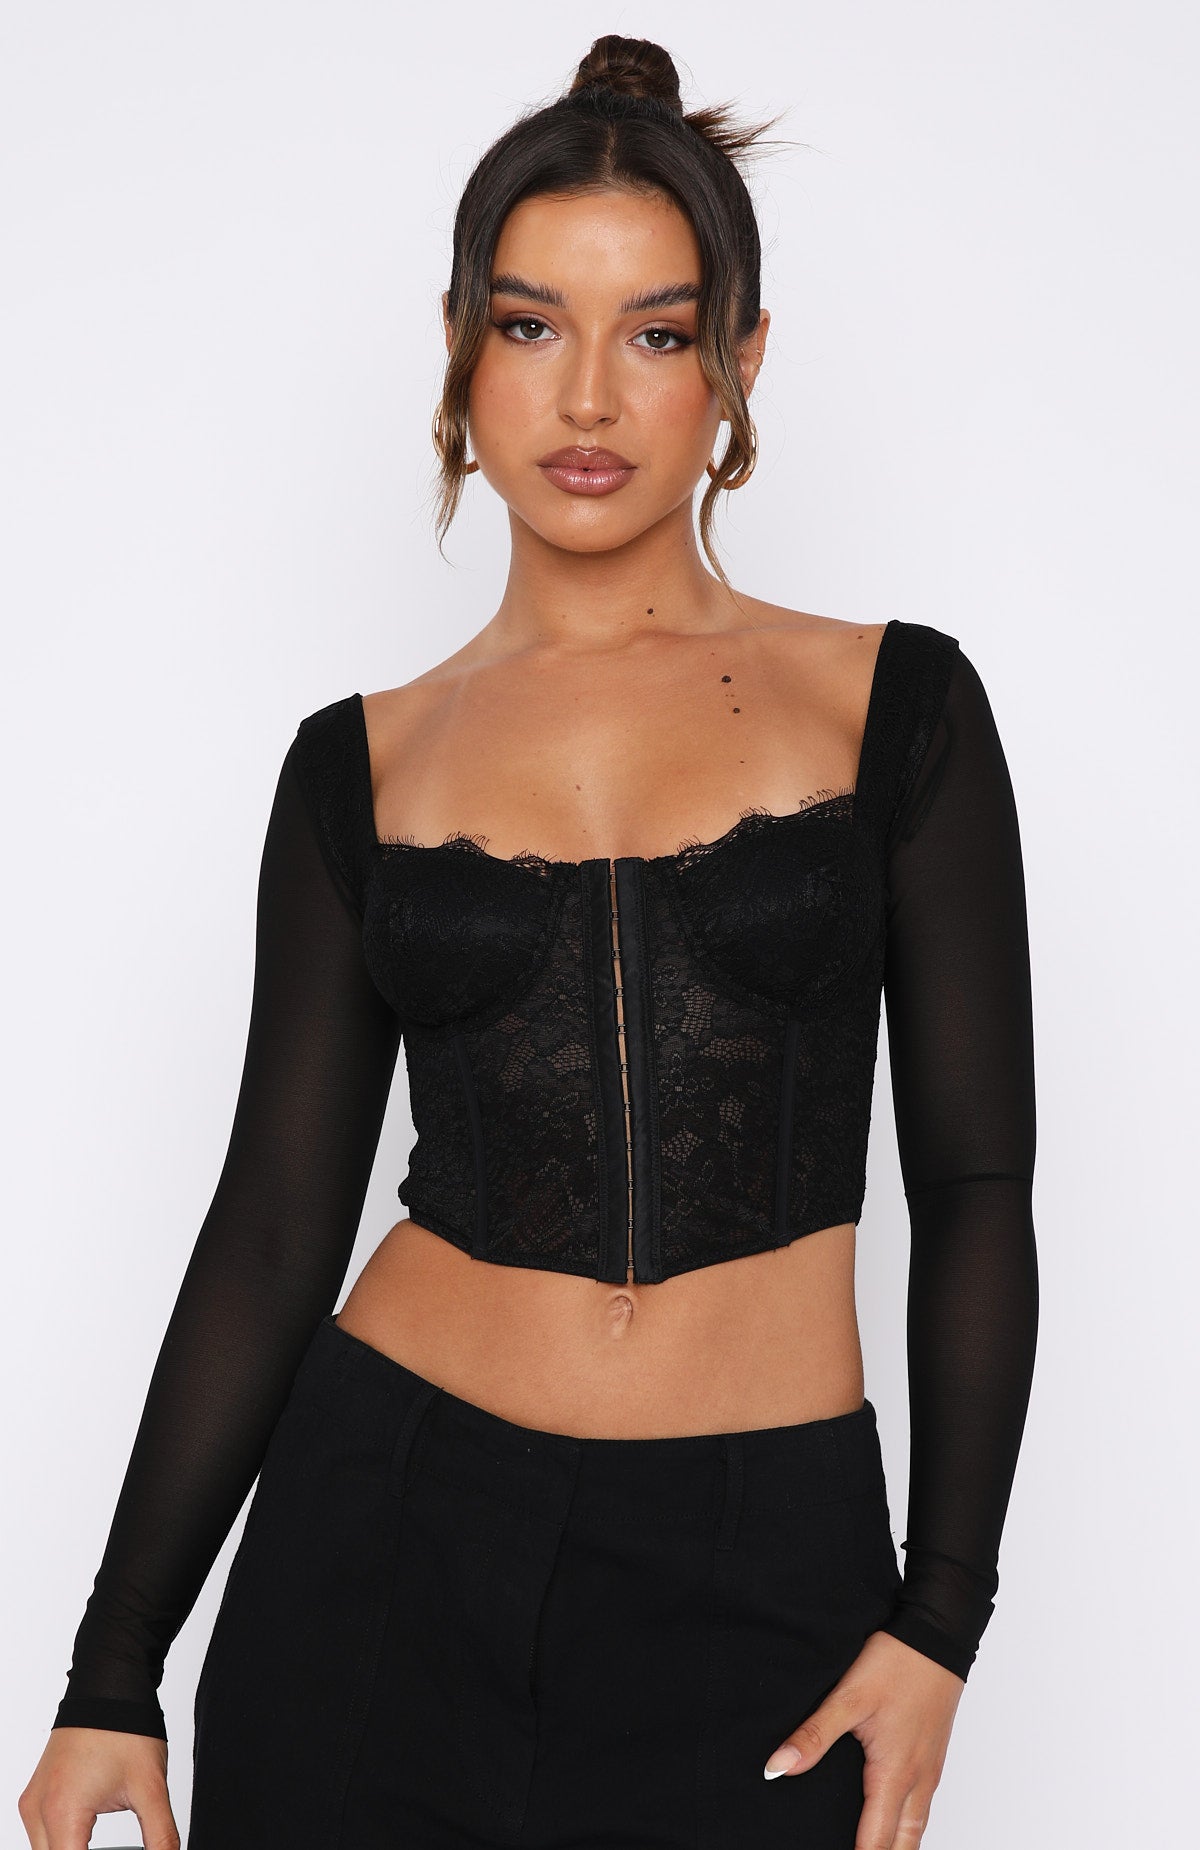 Go See White with Black Trim Long Sleeve Bustier Top FINAL SALE – DETOURE